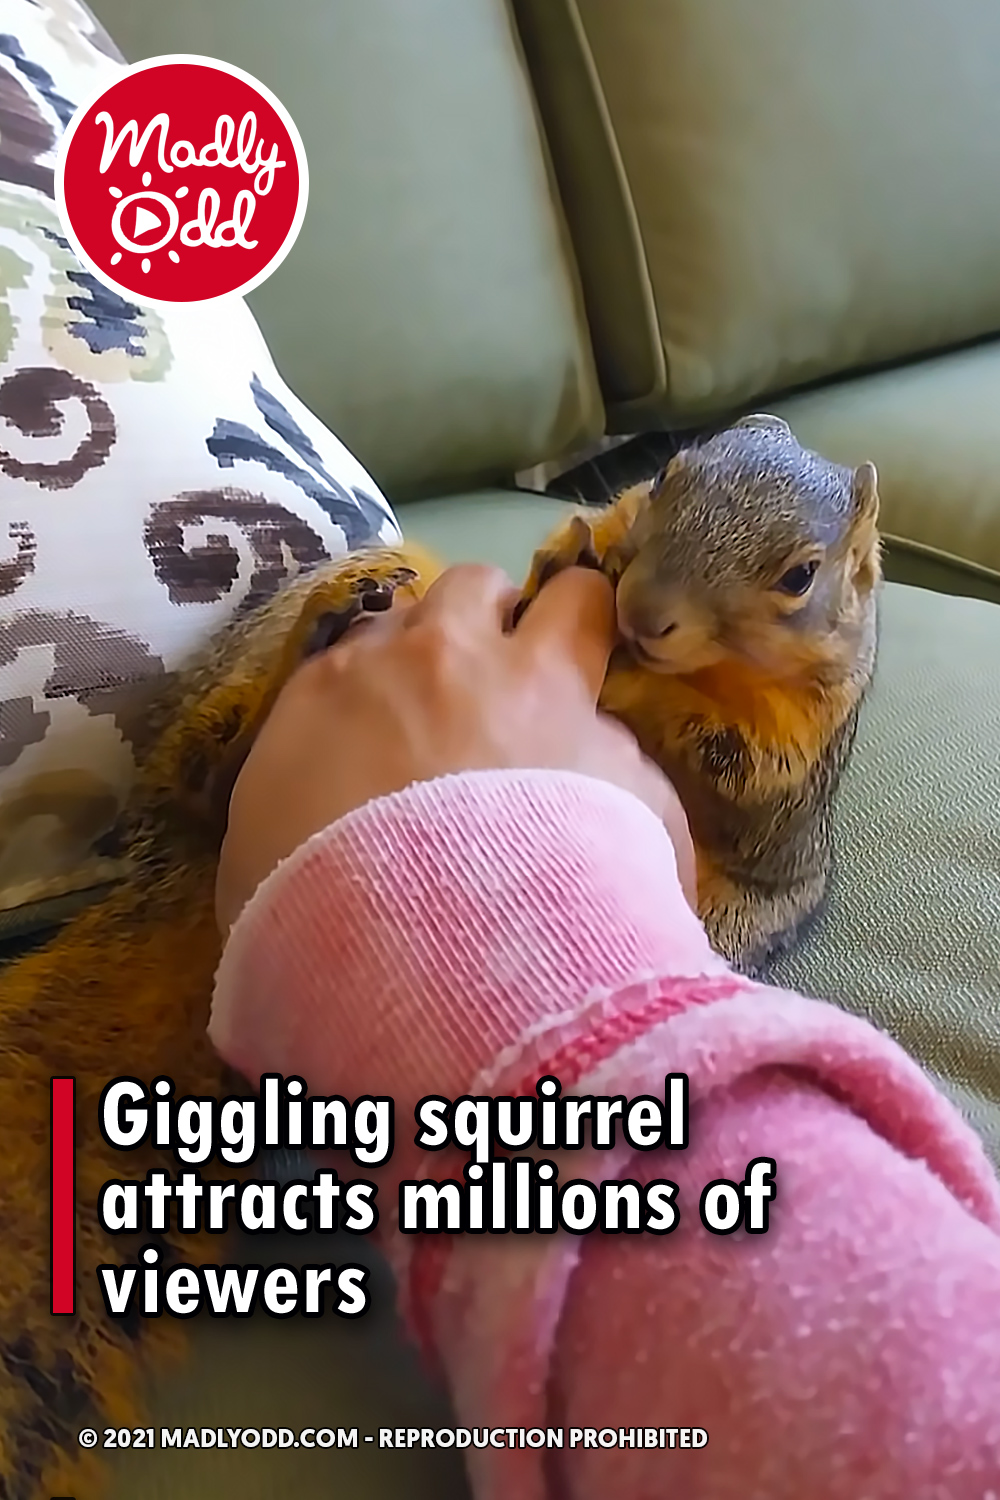 Giggling squirrel attracts millions of viewers